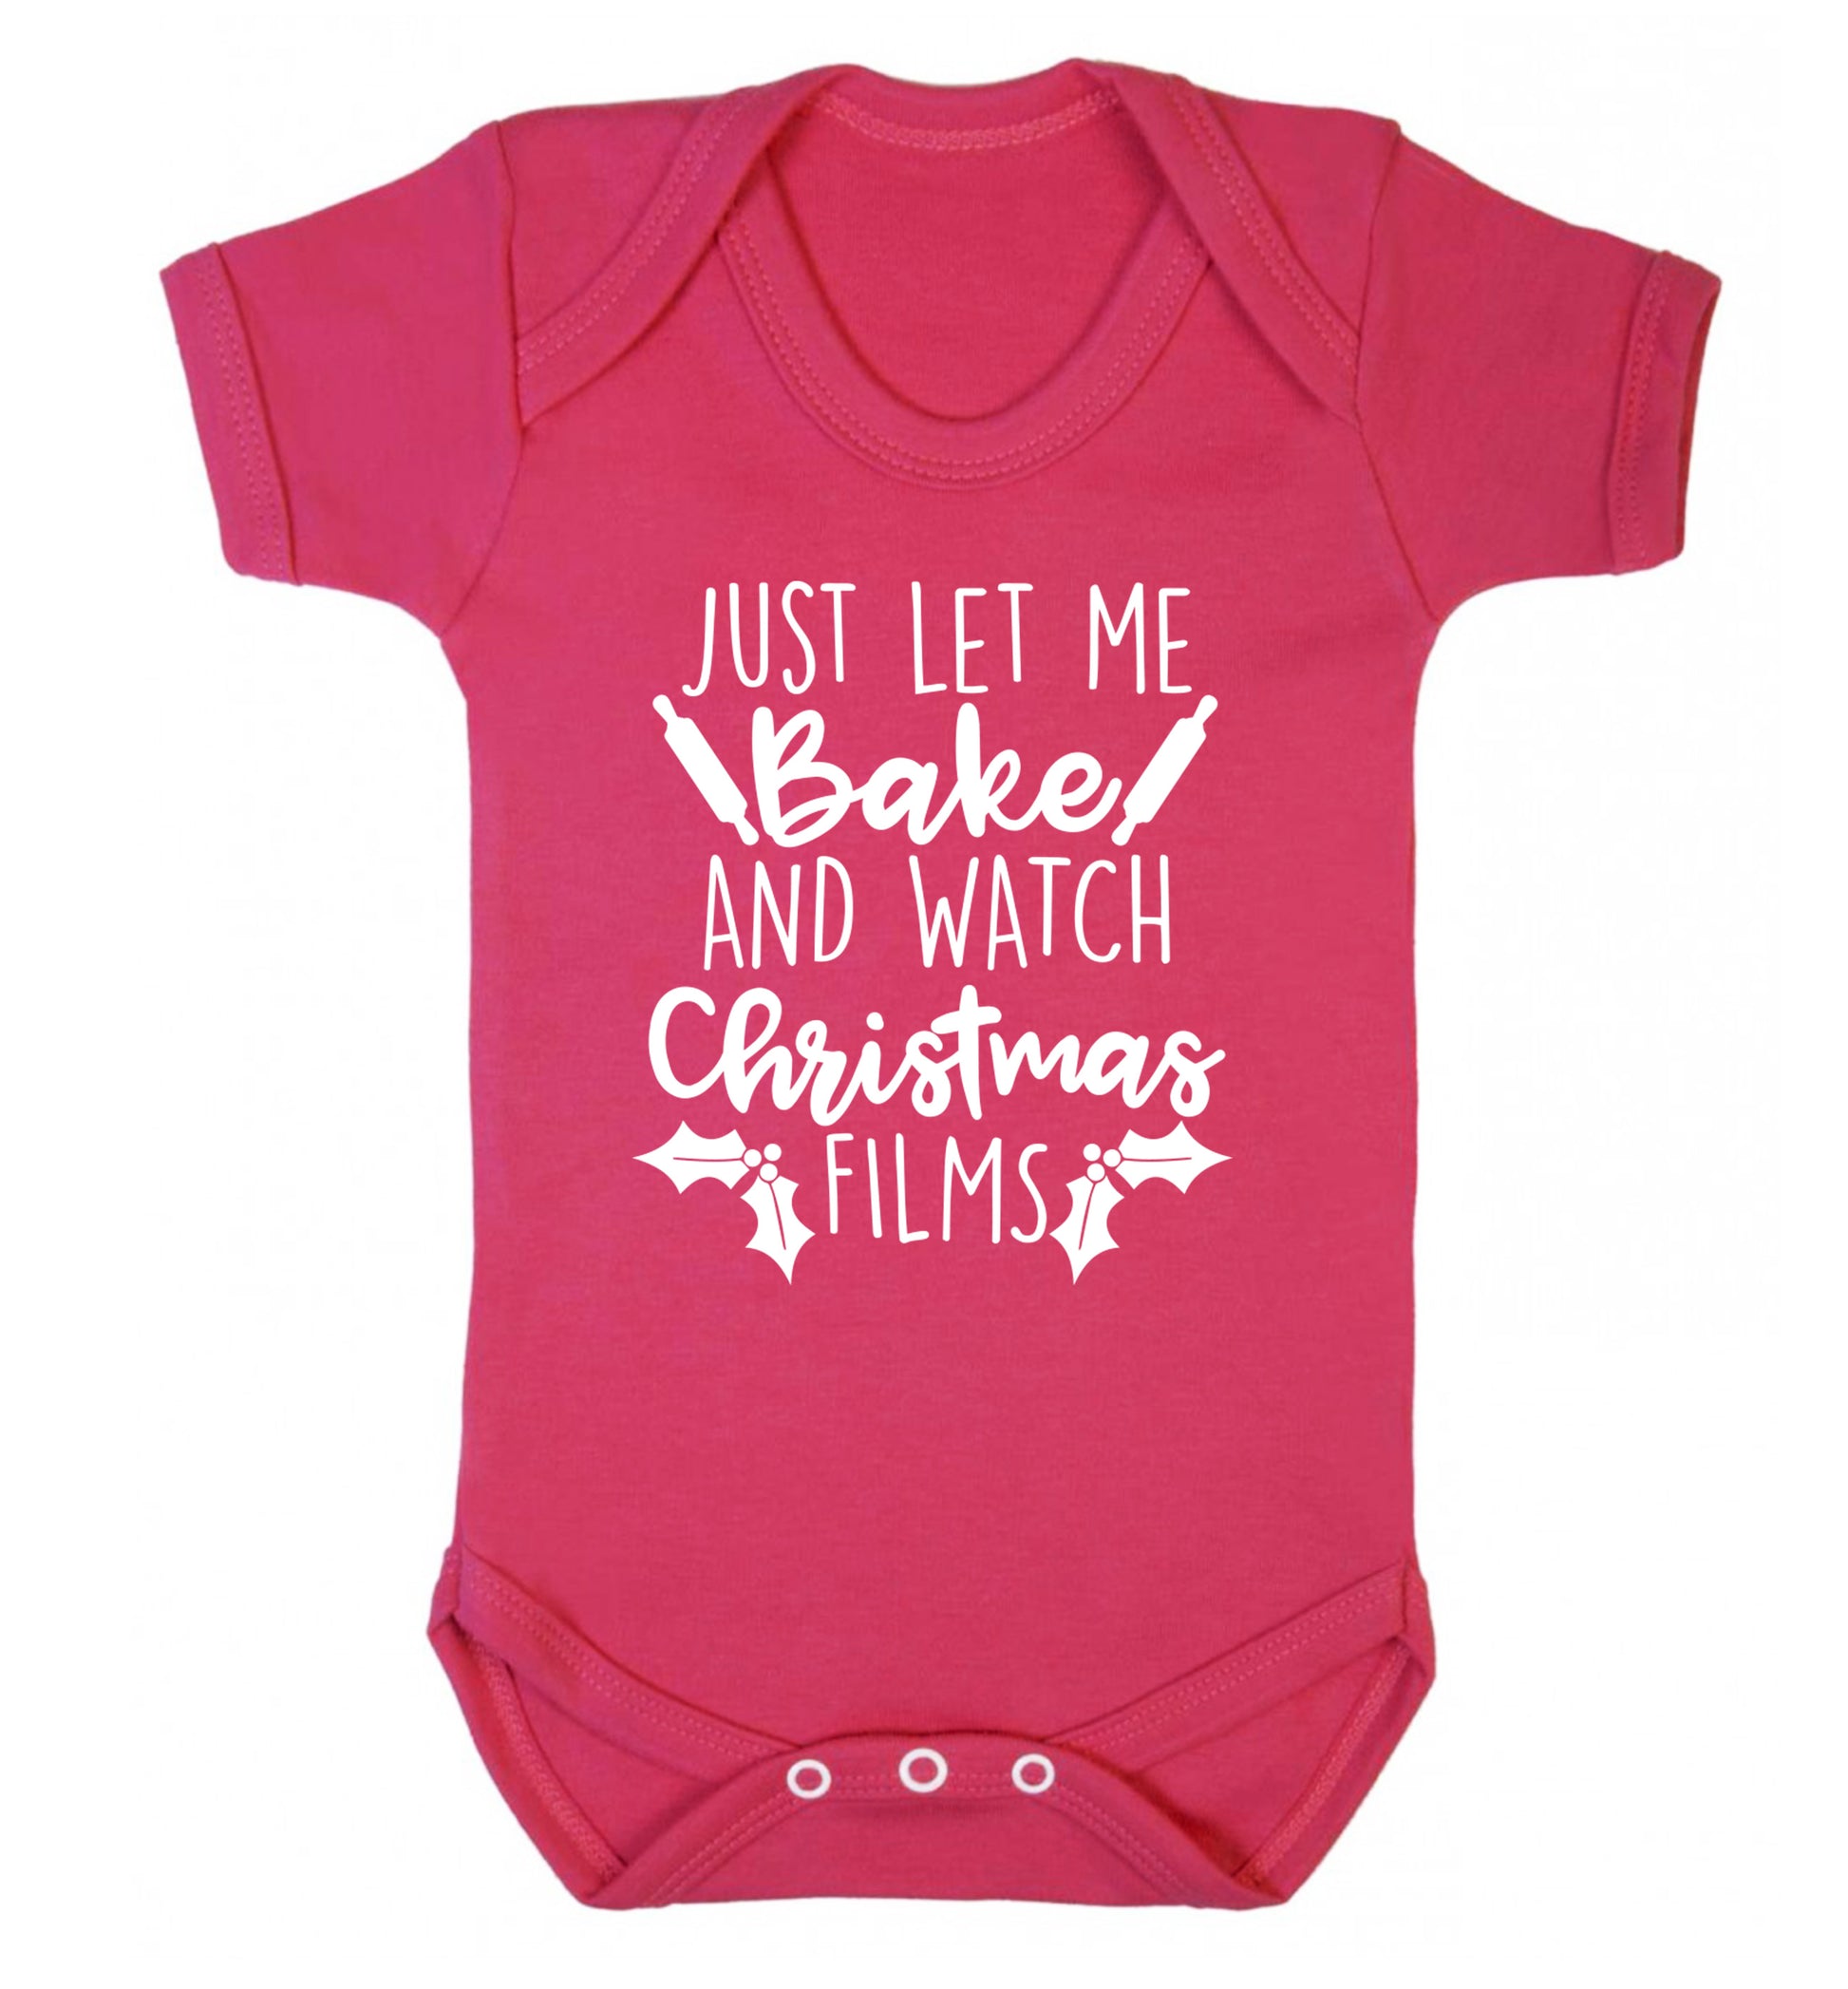 Just let me bake and watch Christmas films Baby Vest dark pink 18-24 months